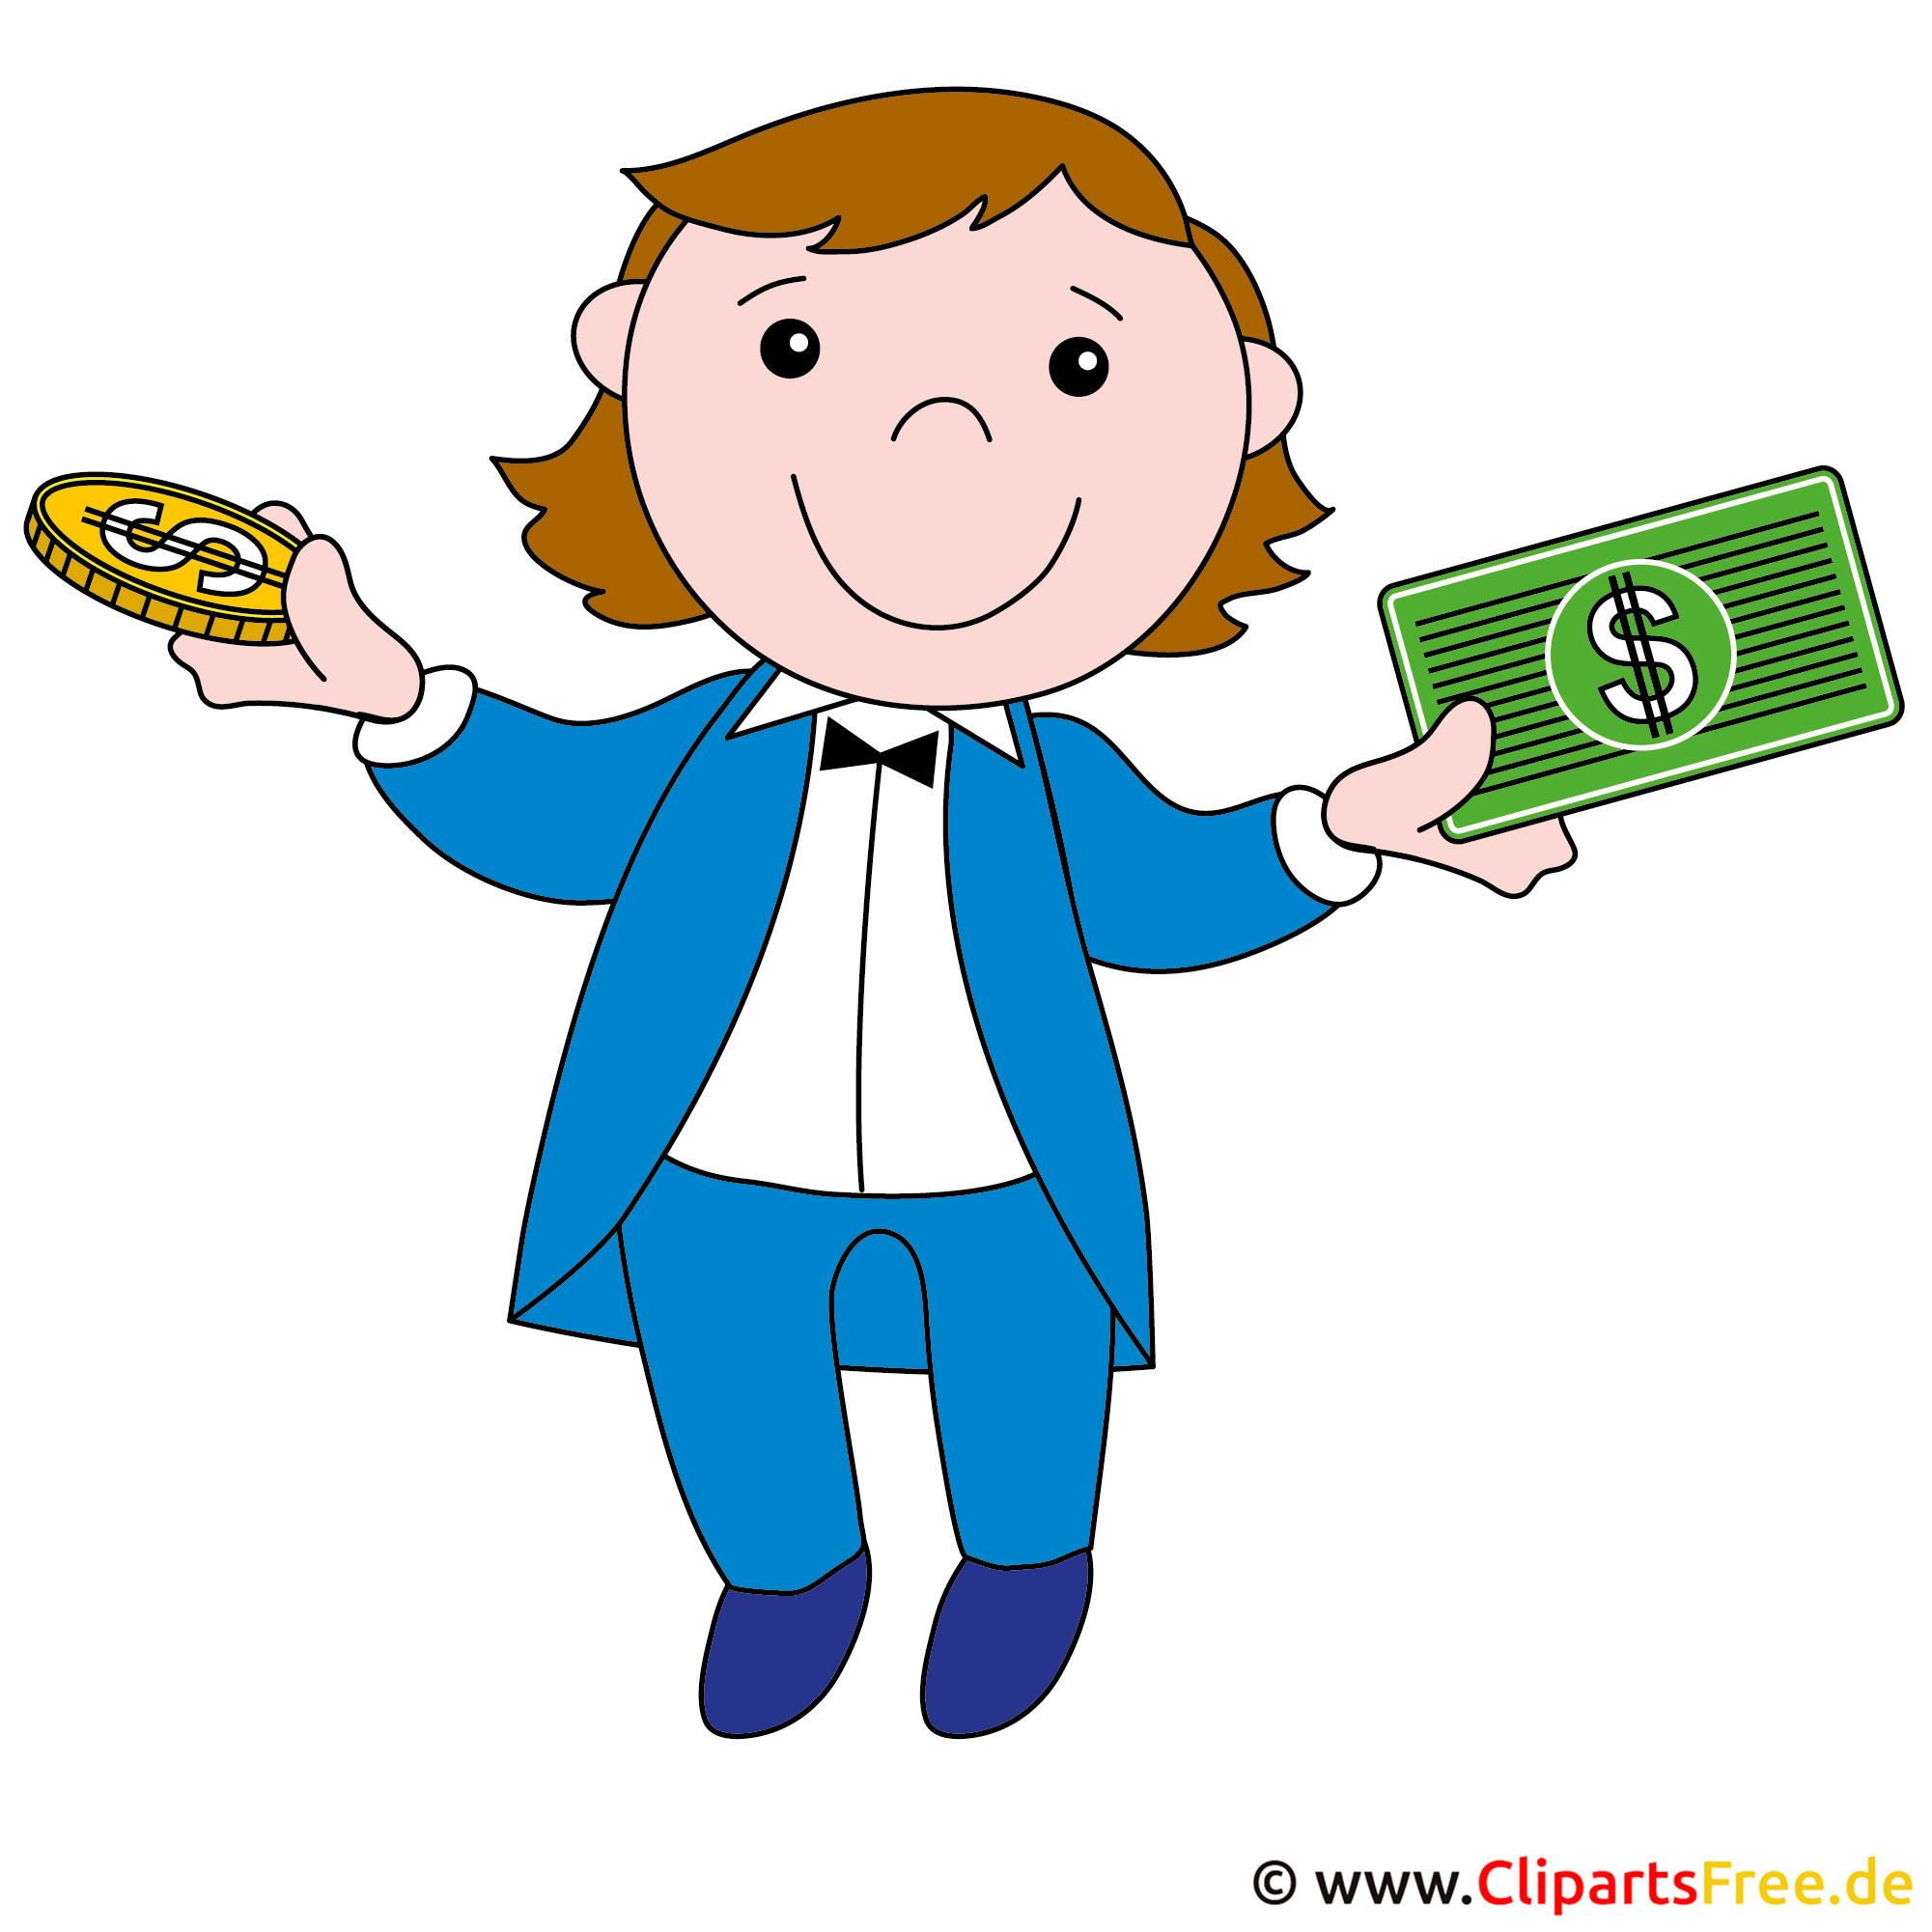 clip art images of bank - photo #46